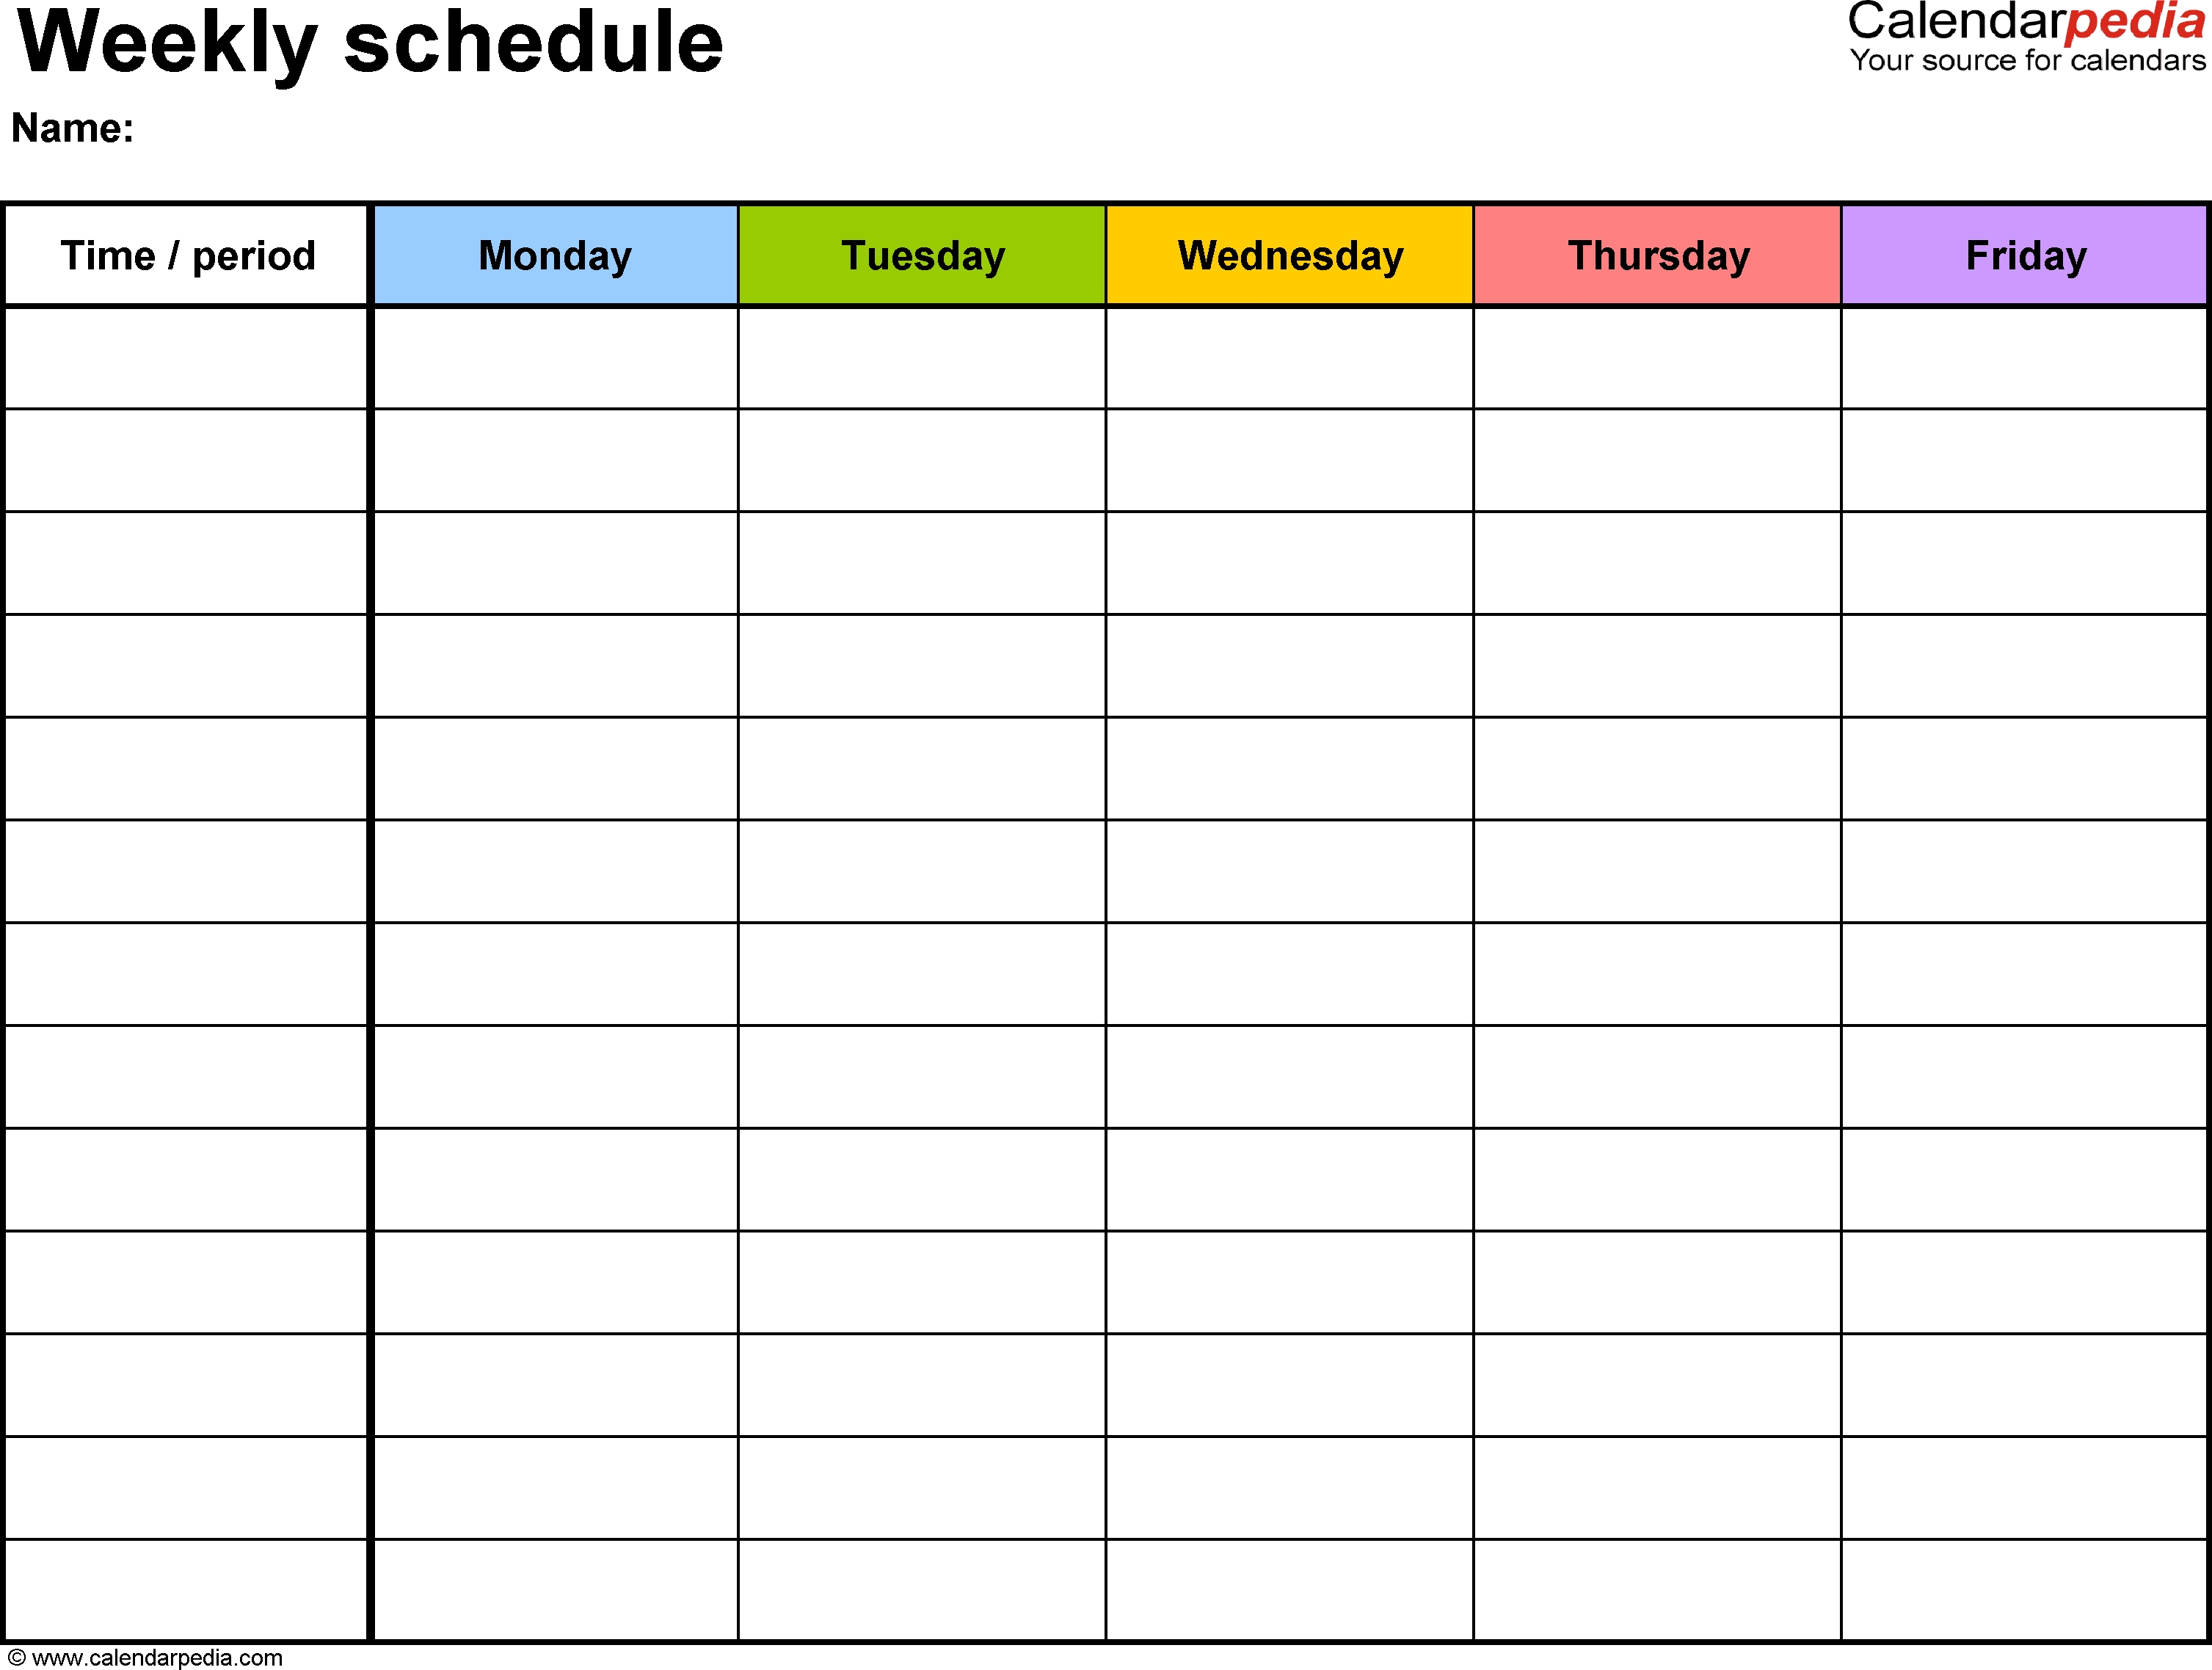 Free Weekly Schedule Templates For Excel - 18 Templates throughout Printable Day To Day Calendar